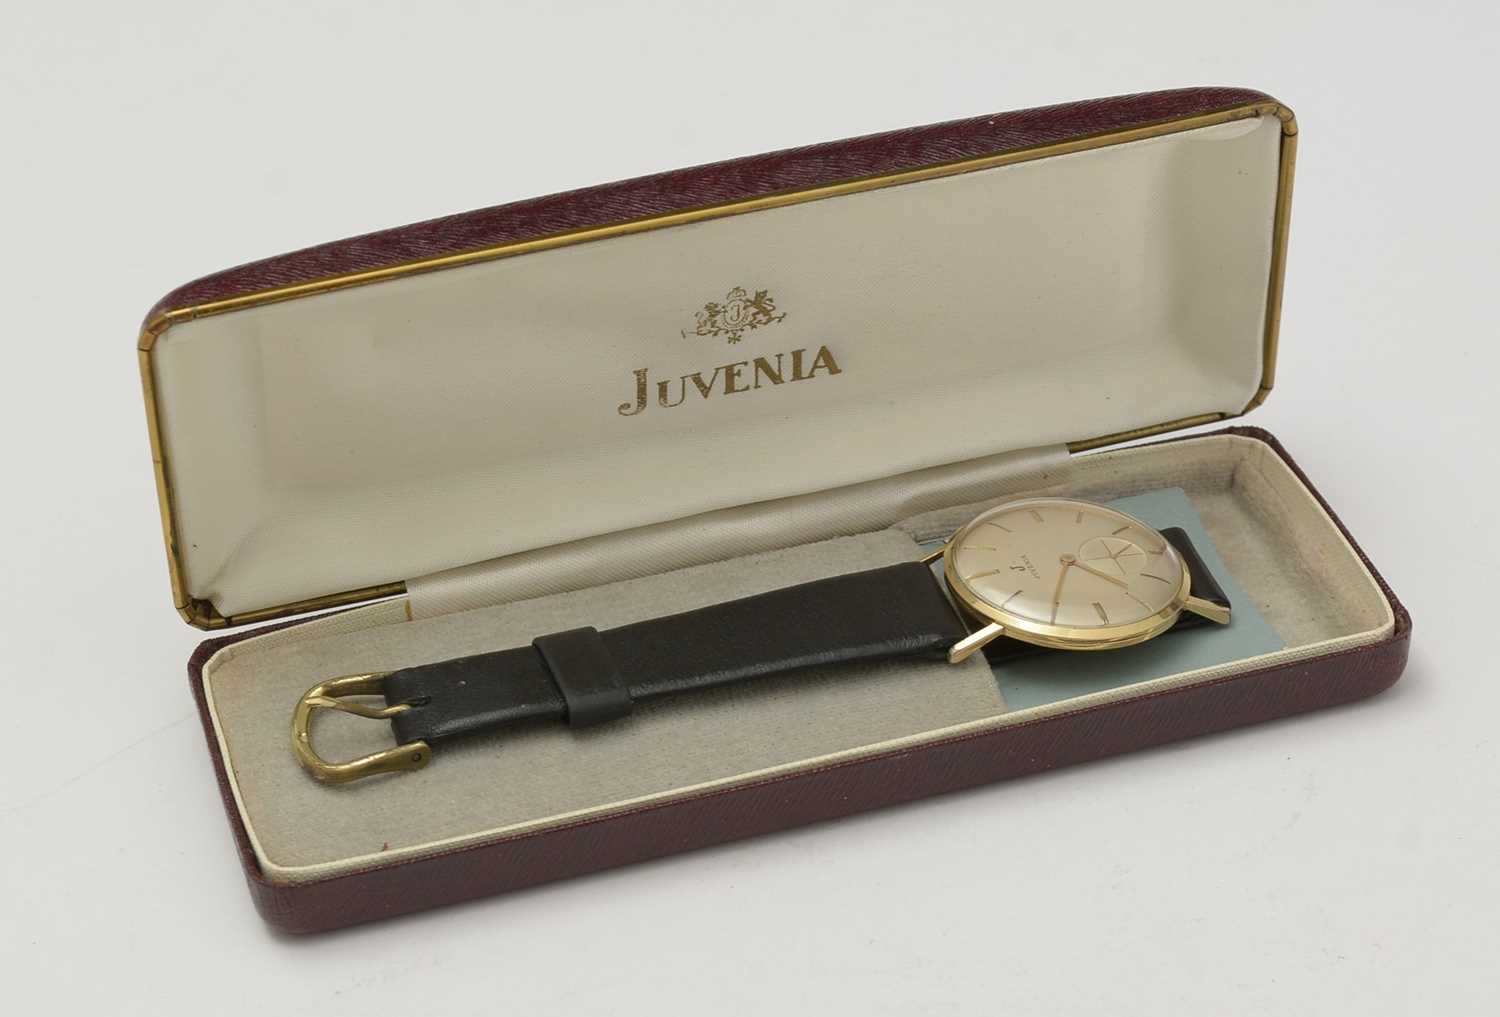 Juventa: a gold-plated cased manual wind wristwatch - Image 6 of 6